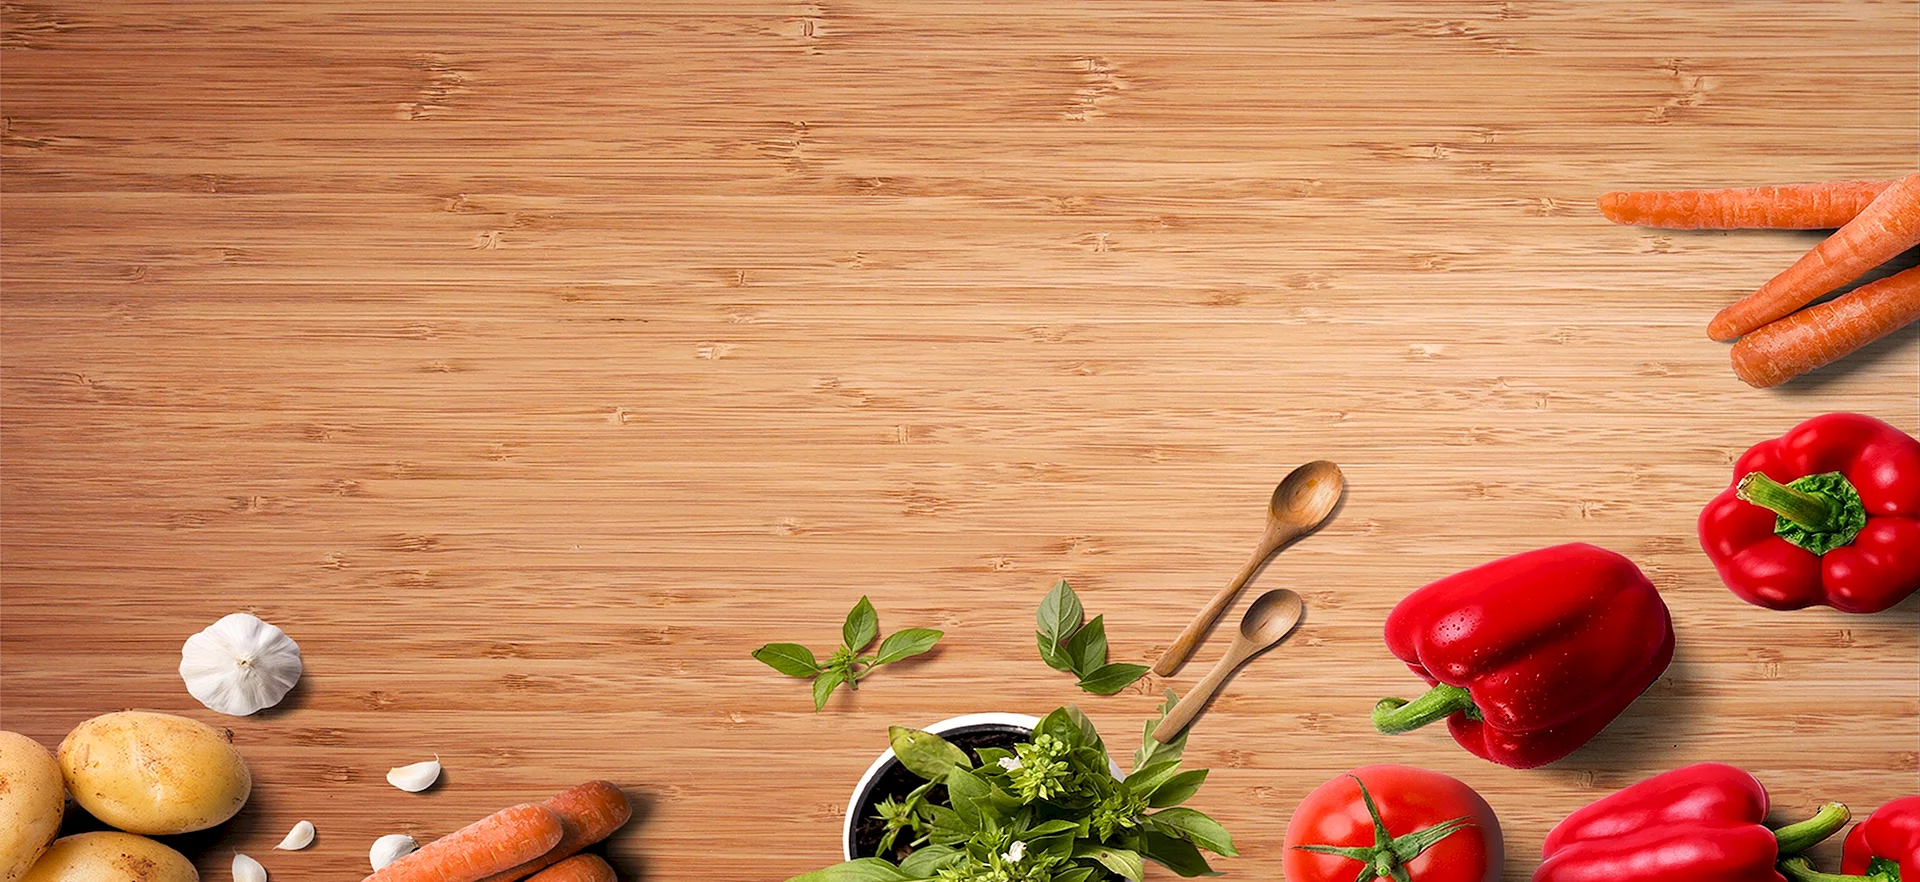 Wood Table Background Kitchen Wallpaper